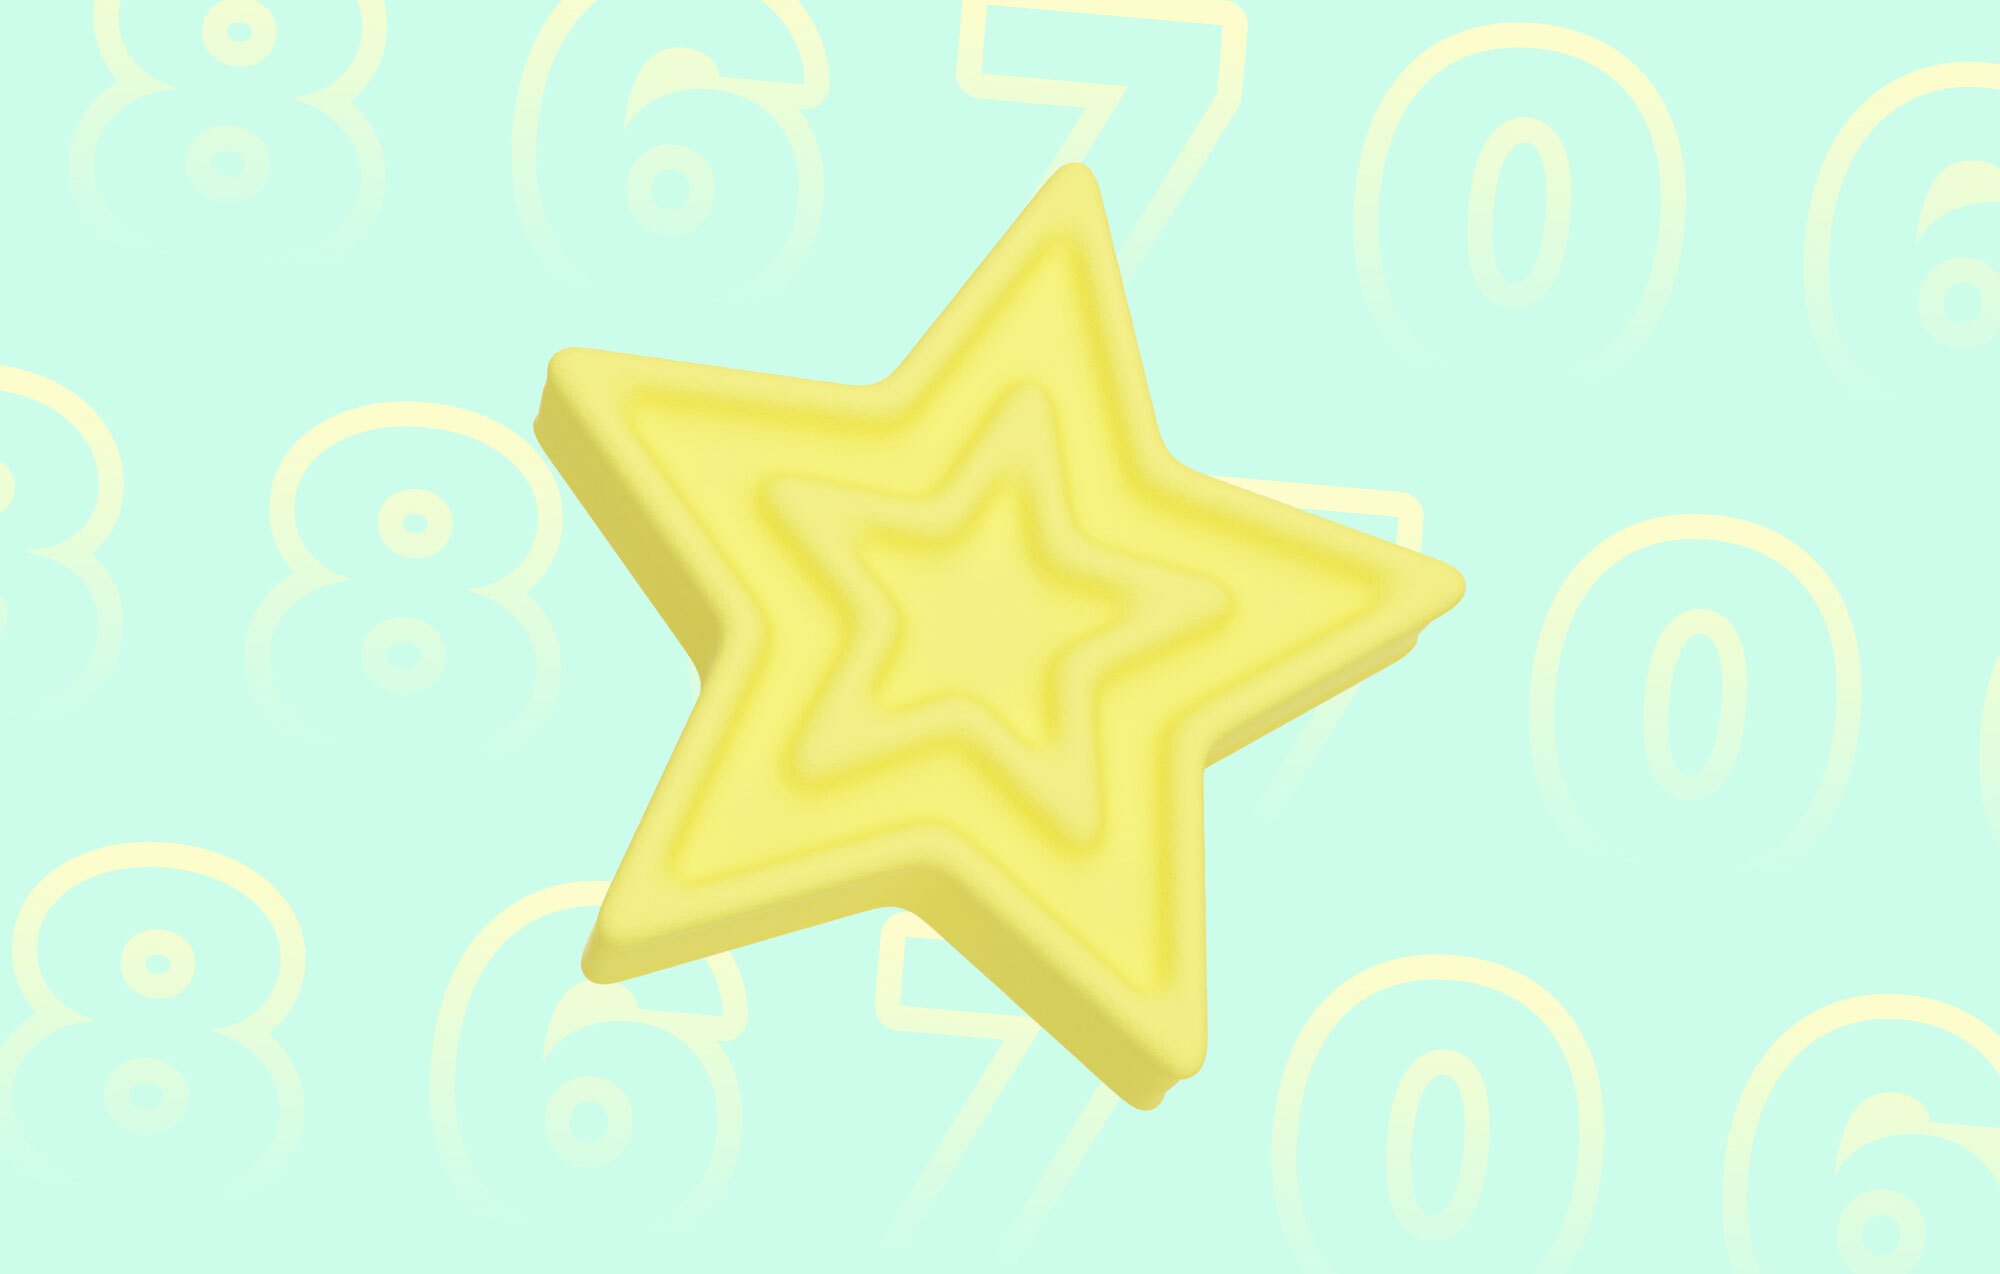 3D star on a background of numbers